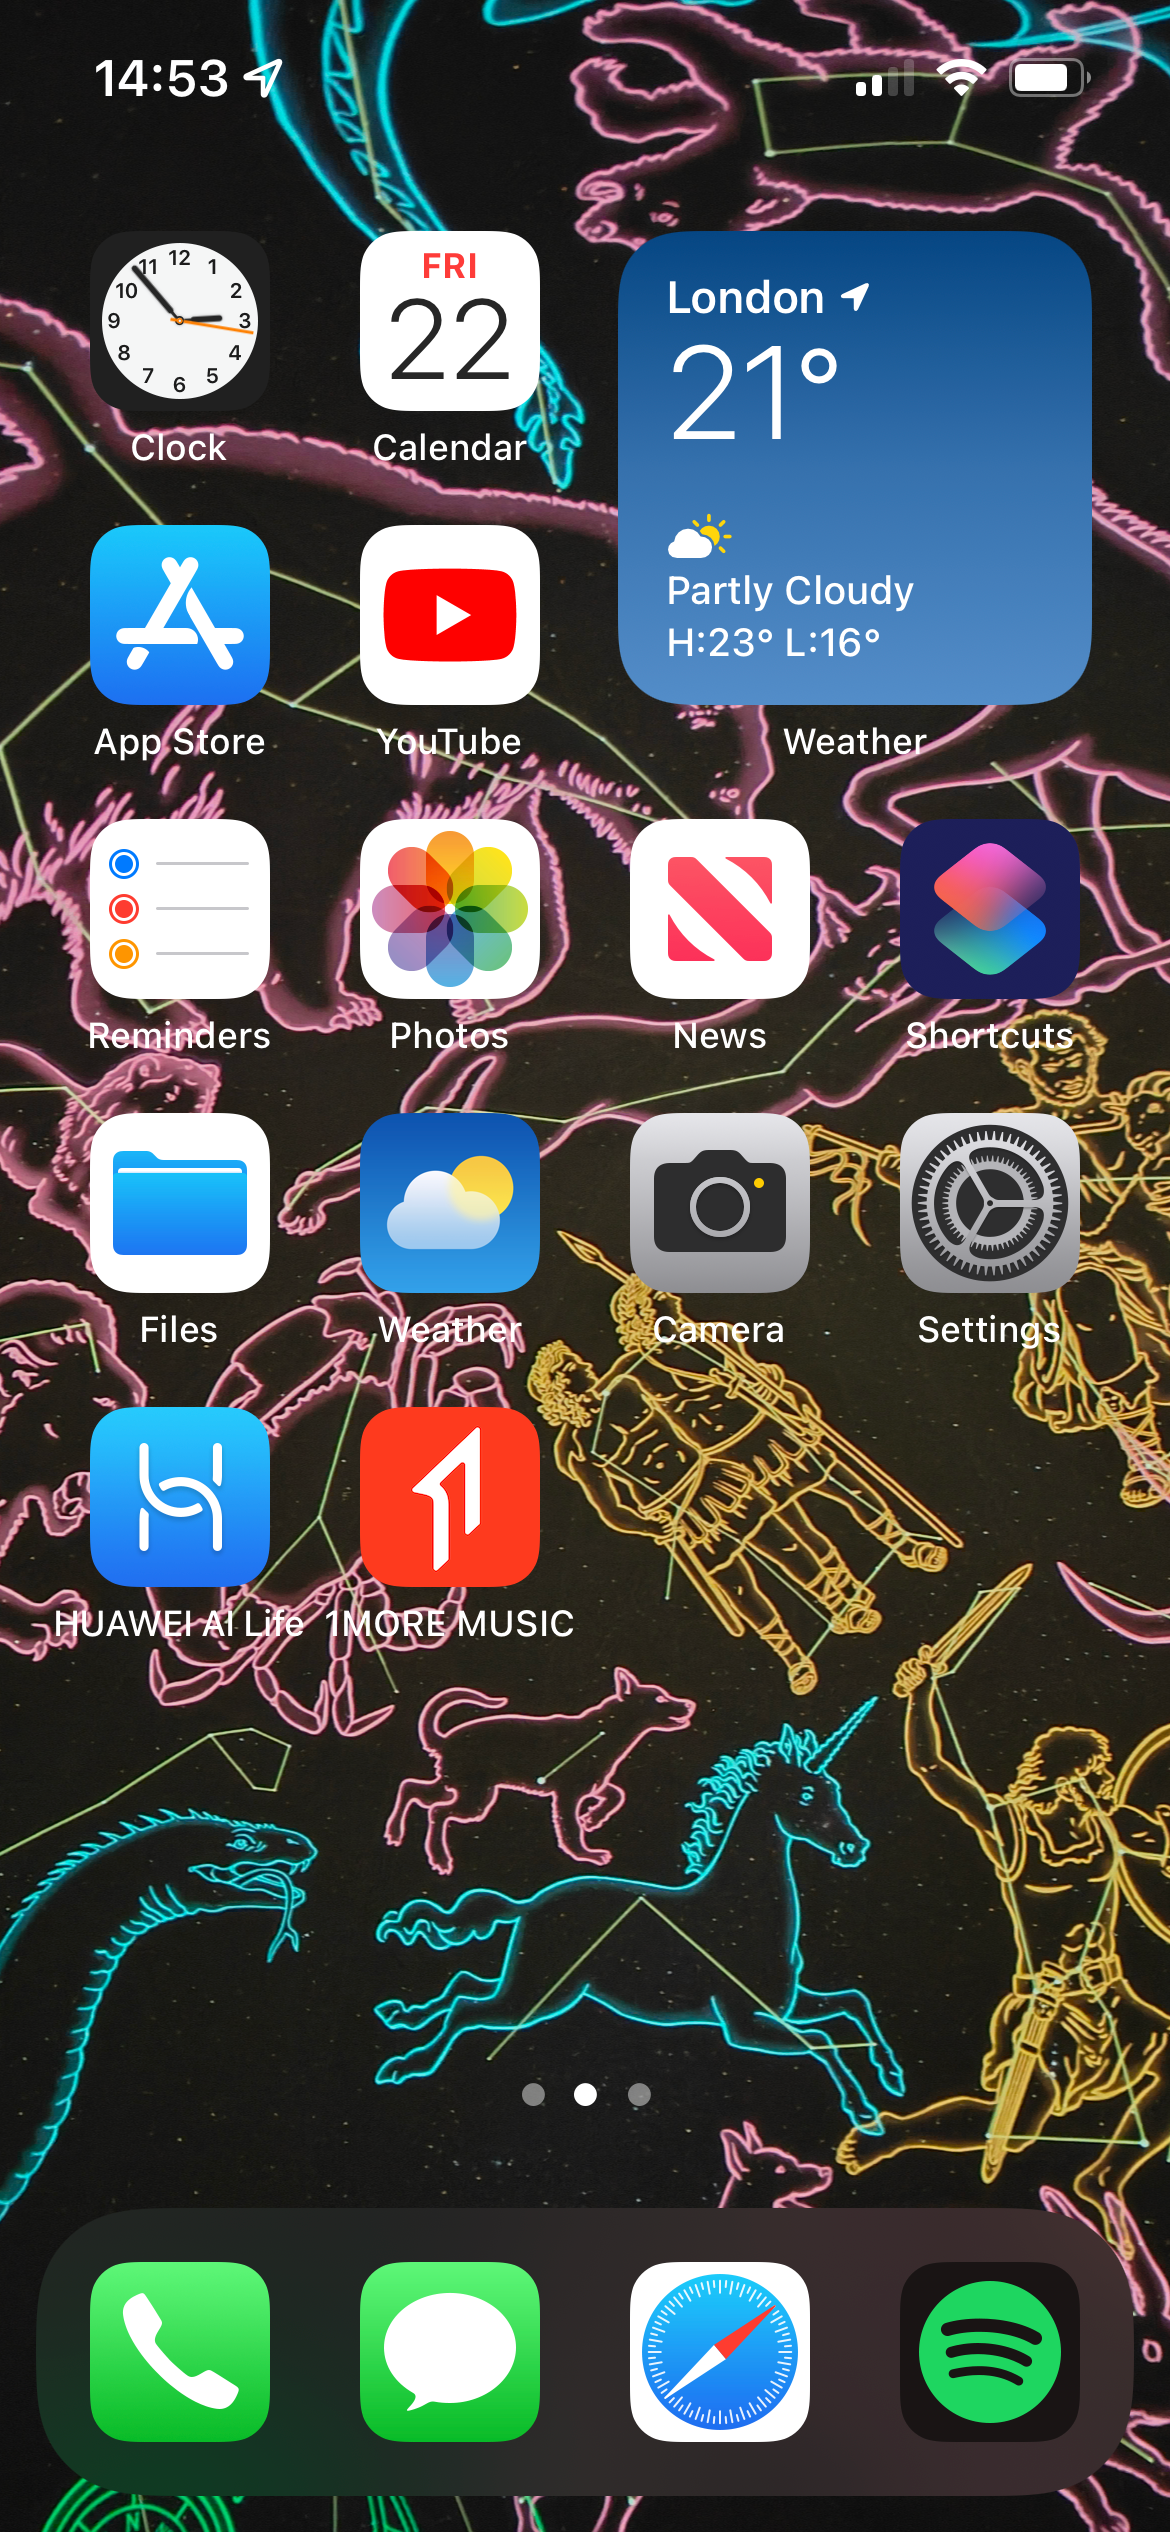 The homescreen of my iphone